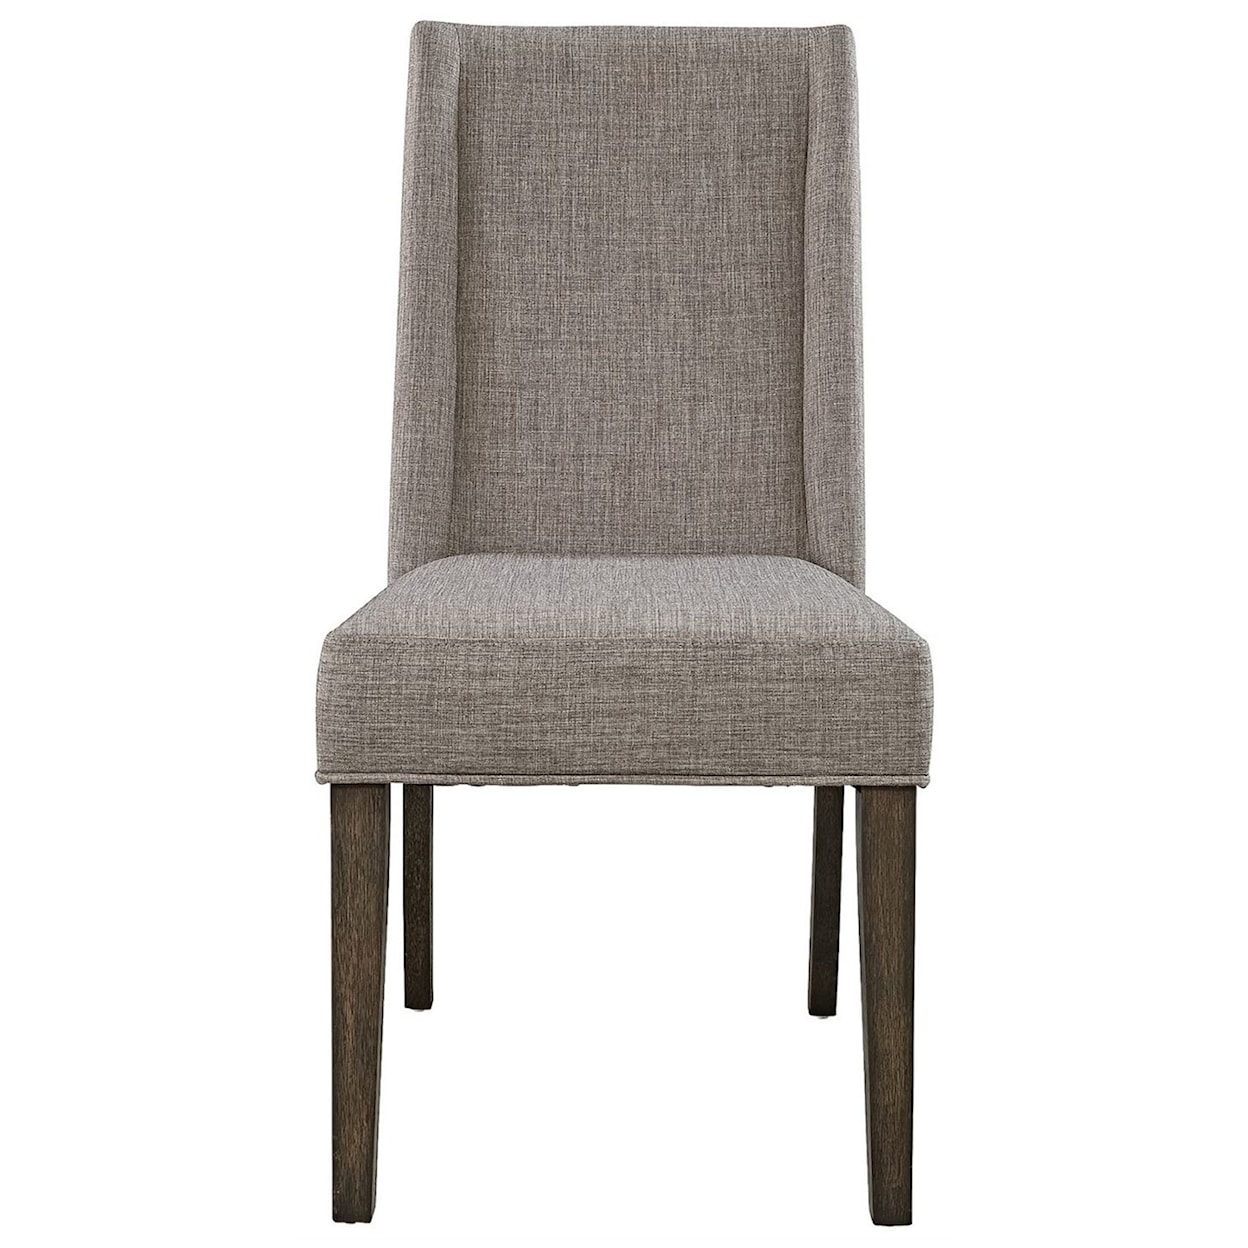 Freedom Furniture Double Bridge Upholstered Dining Side Chair